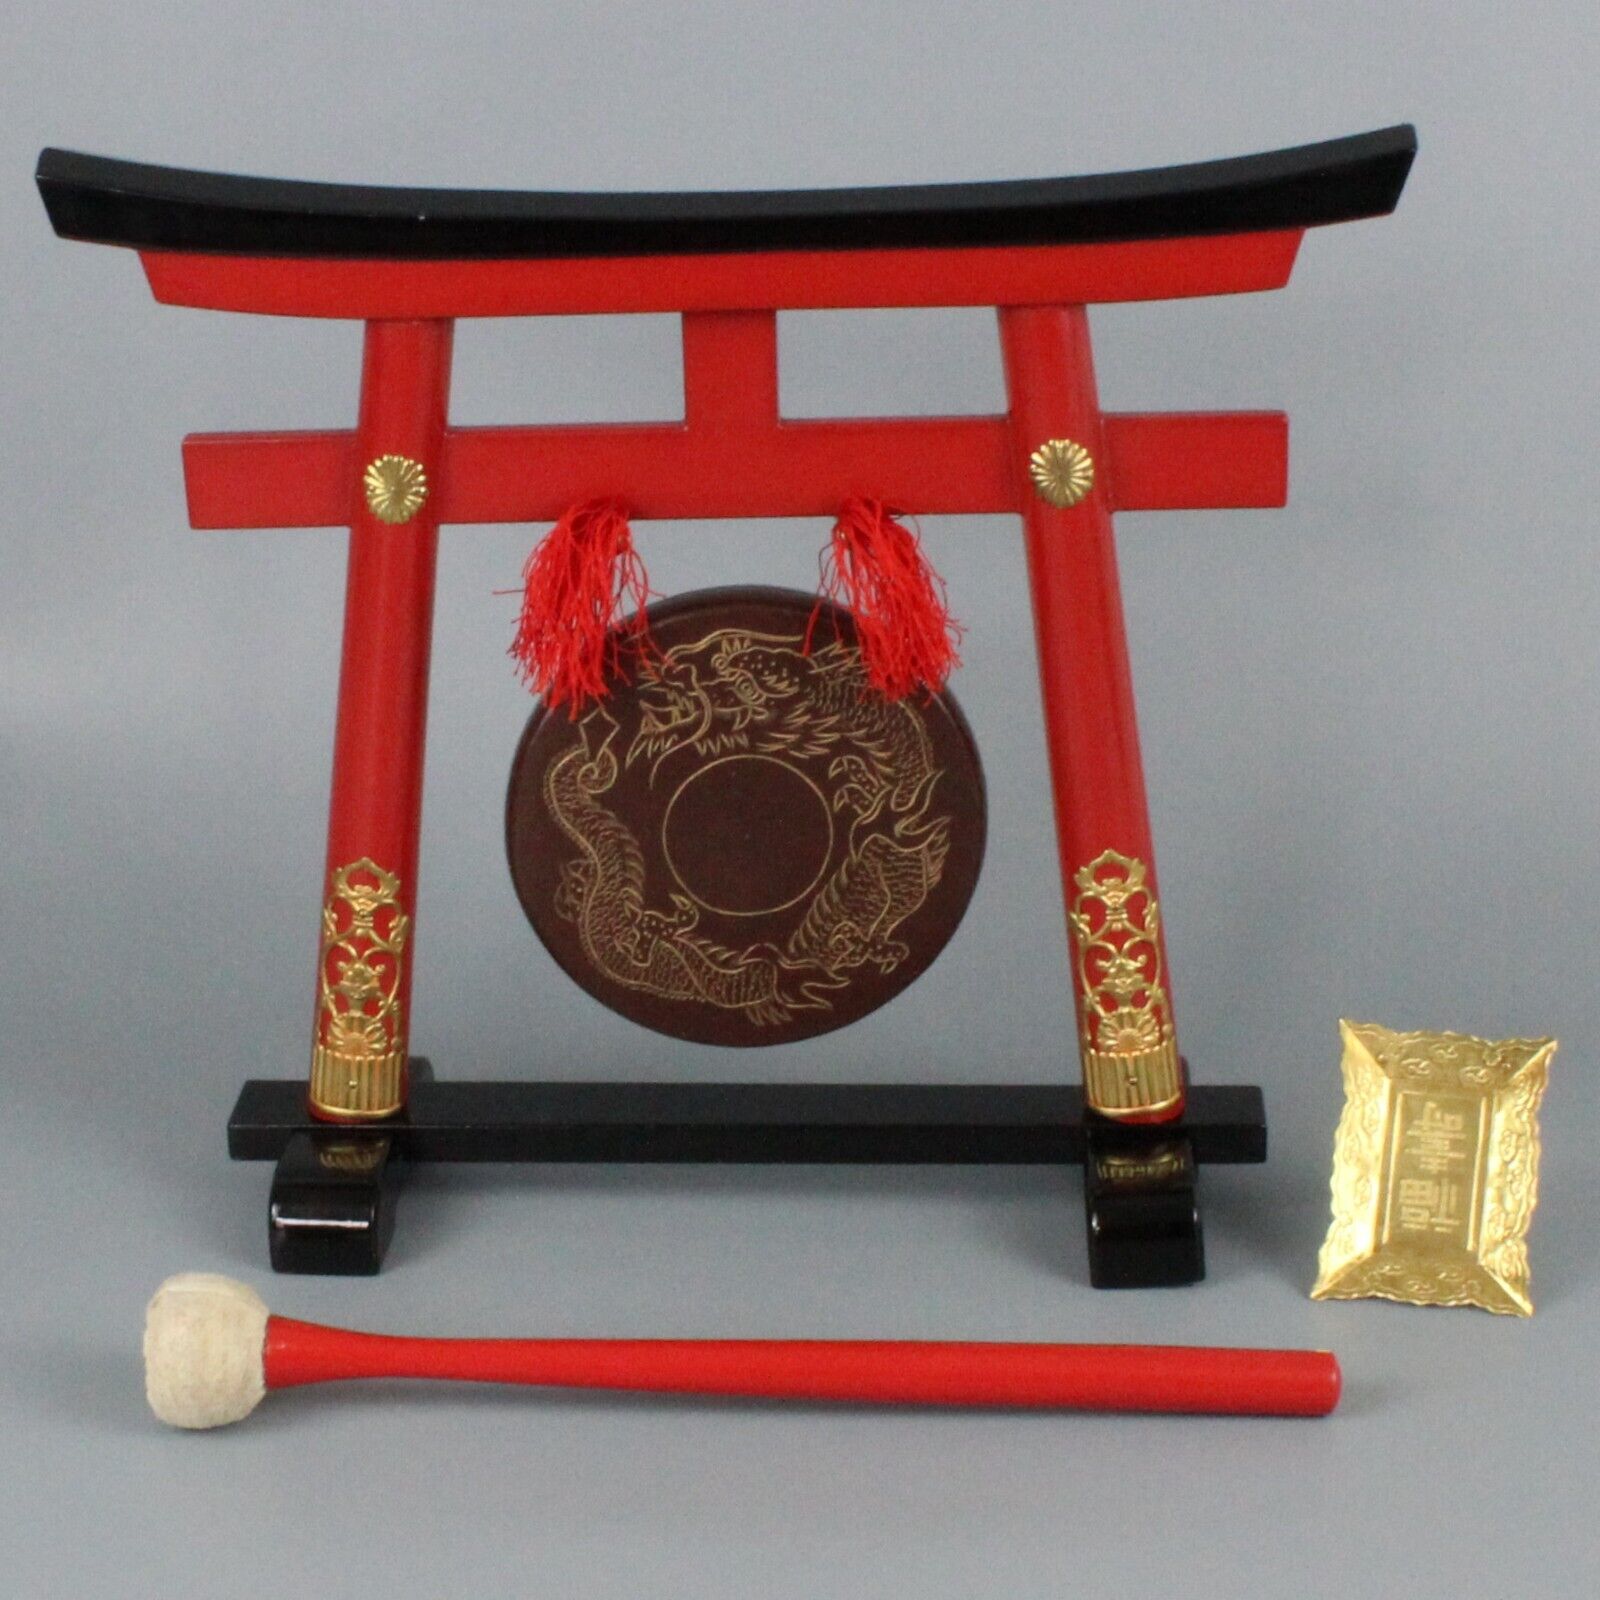 Japanese Torii gate table dragon GONG 1952 Japan 5 inch gong Red Black Lacquer